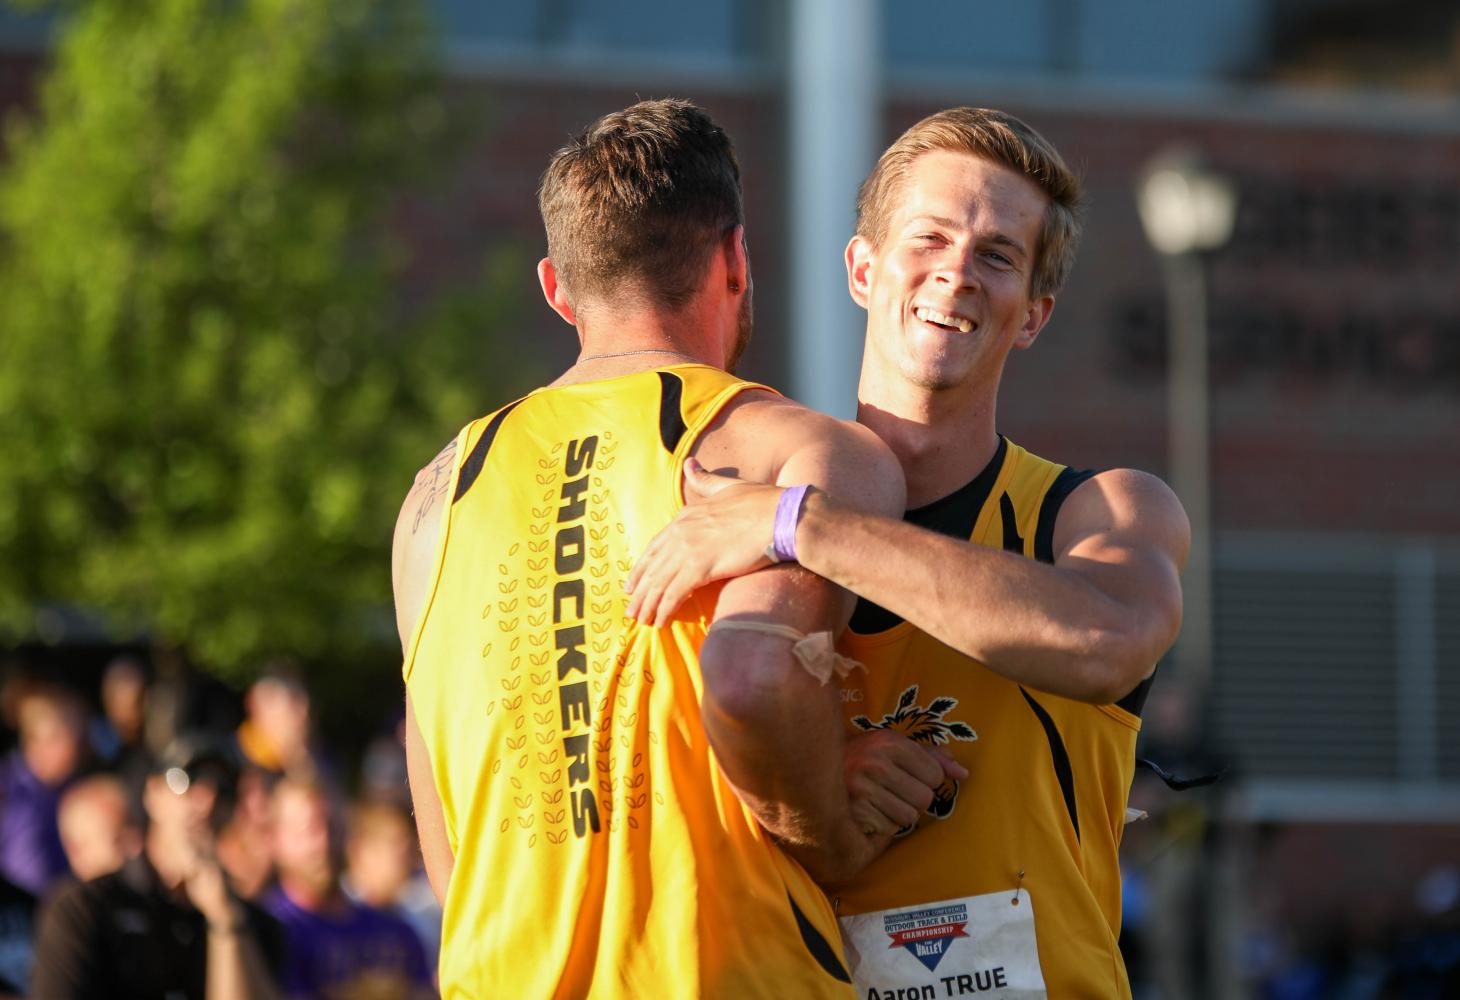 Aaron True hugs a teammate after winning the javelin with a throw of 229 feet 3 inches on Friday at the Missouri Valley Conference Outdoor Track and Field Championship. (May 12, 2017)